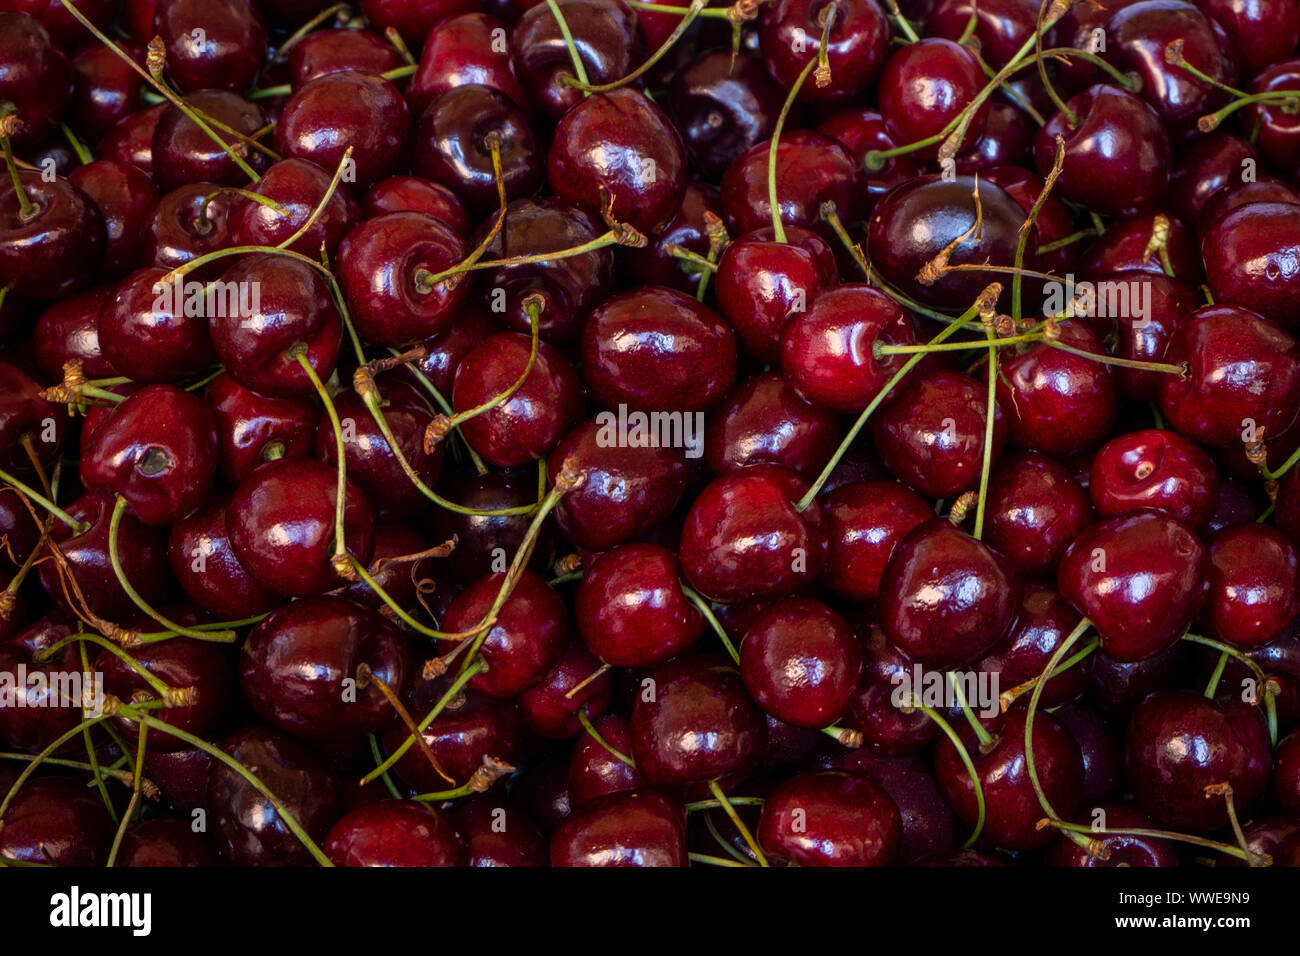 Aerial view of many cherries Stock Photo